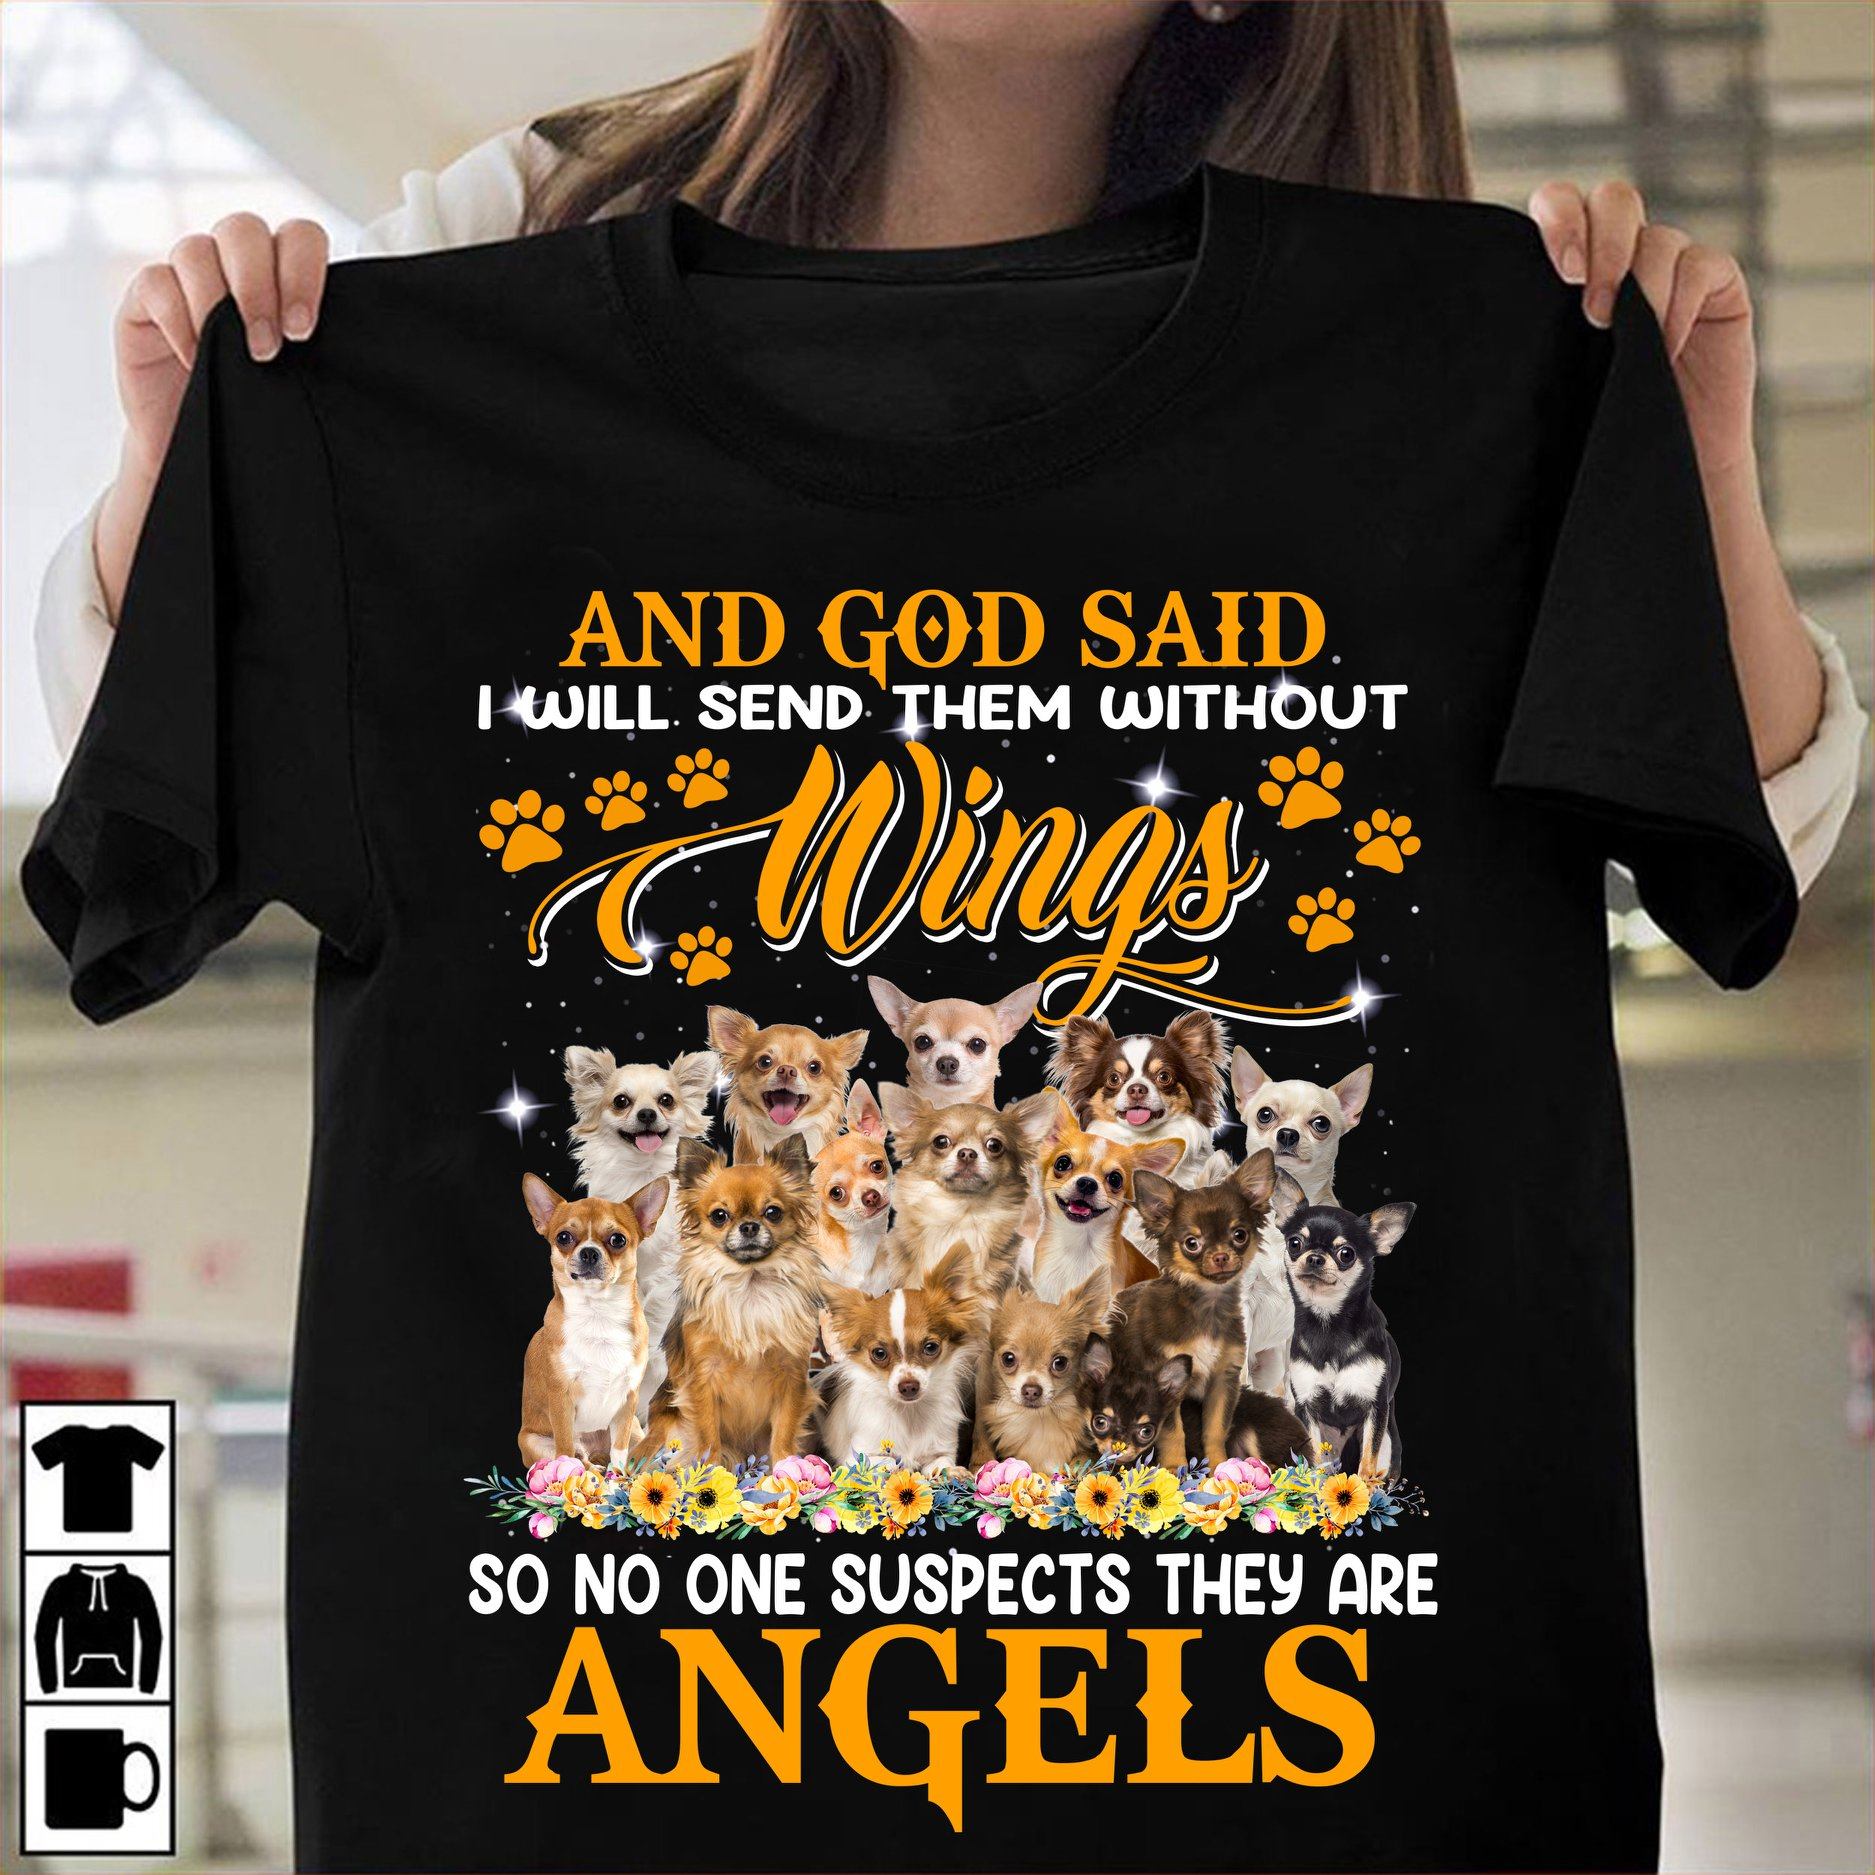 And god said I will send them without wings so no one suspects they are angels - Chihuahua dog